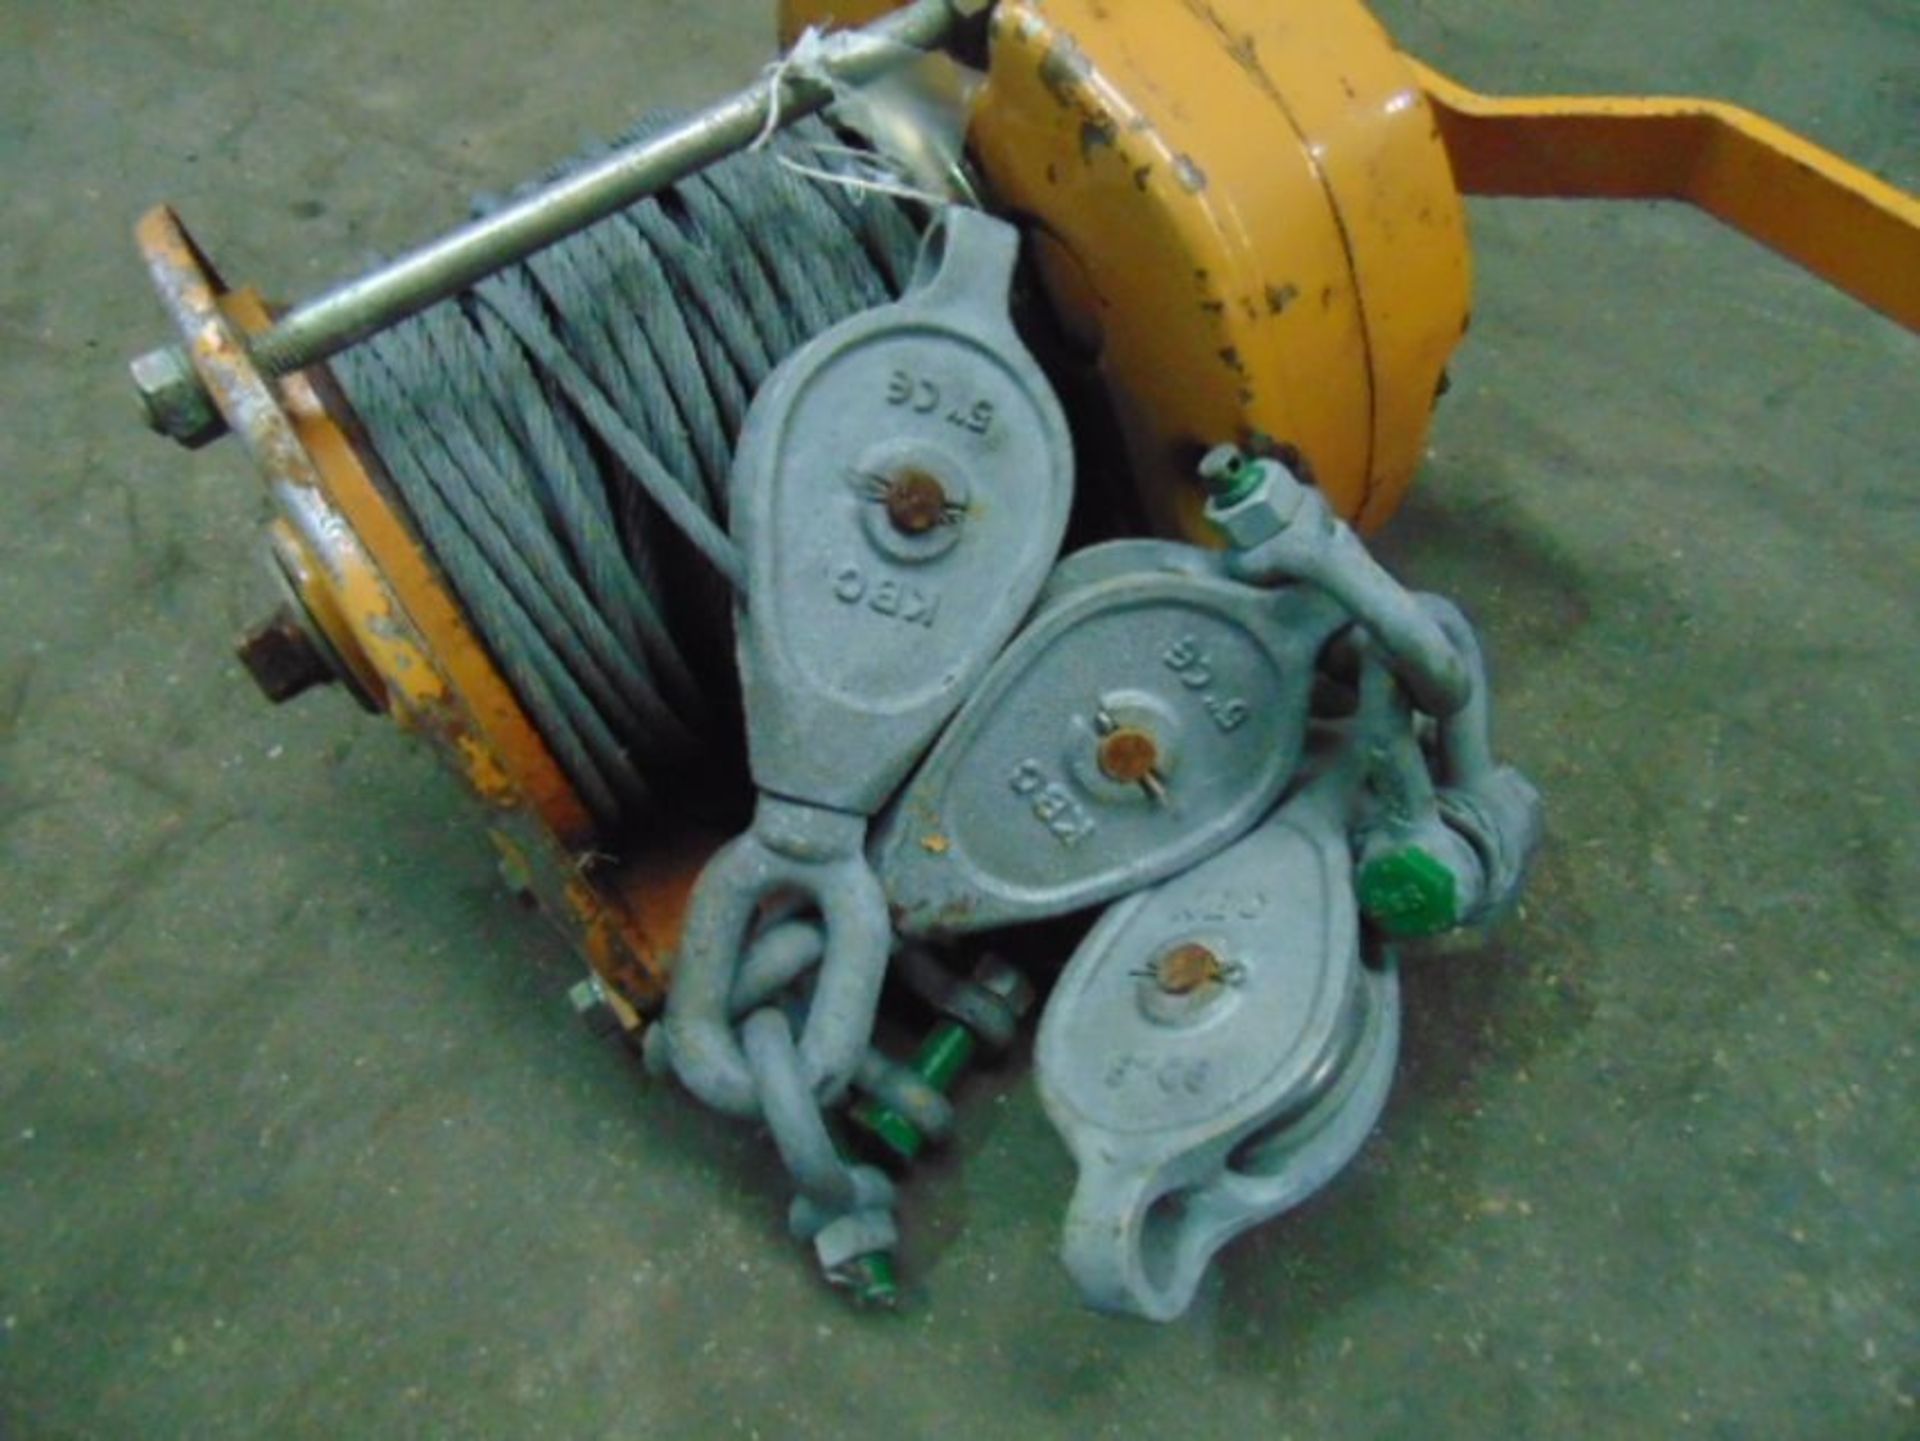 Maxpull GM 20 Handwinch c/w Wire Rope, Pulleys, D Shackles & Handle - Image 2 of 5